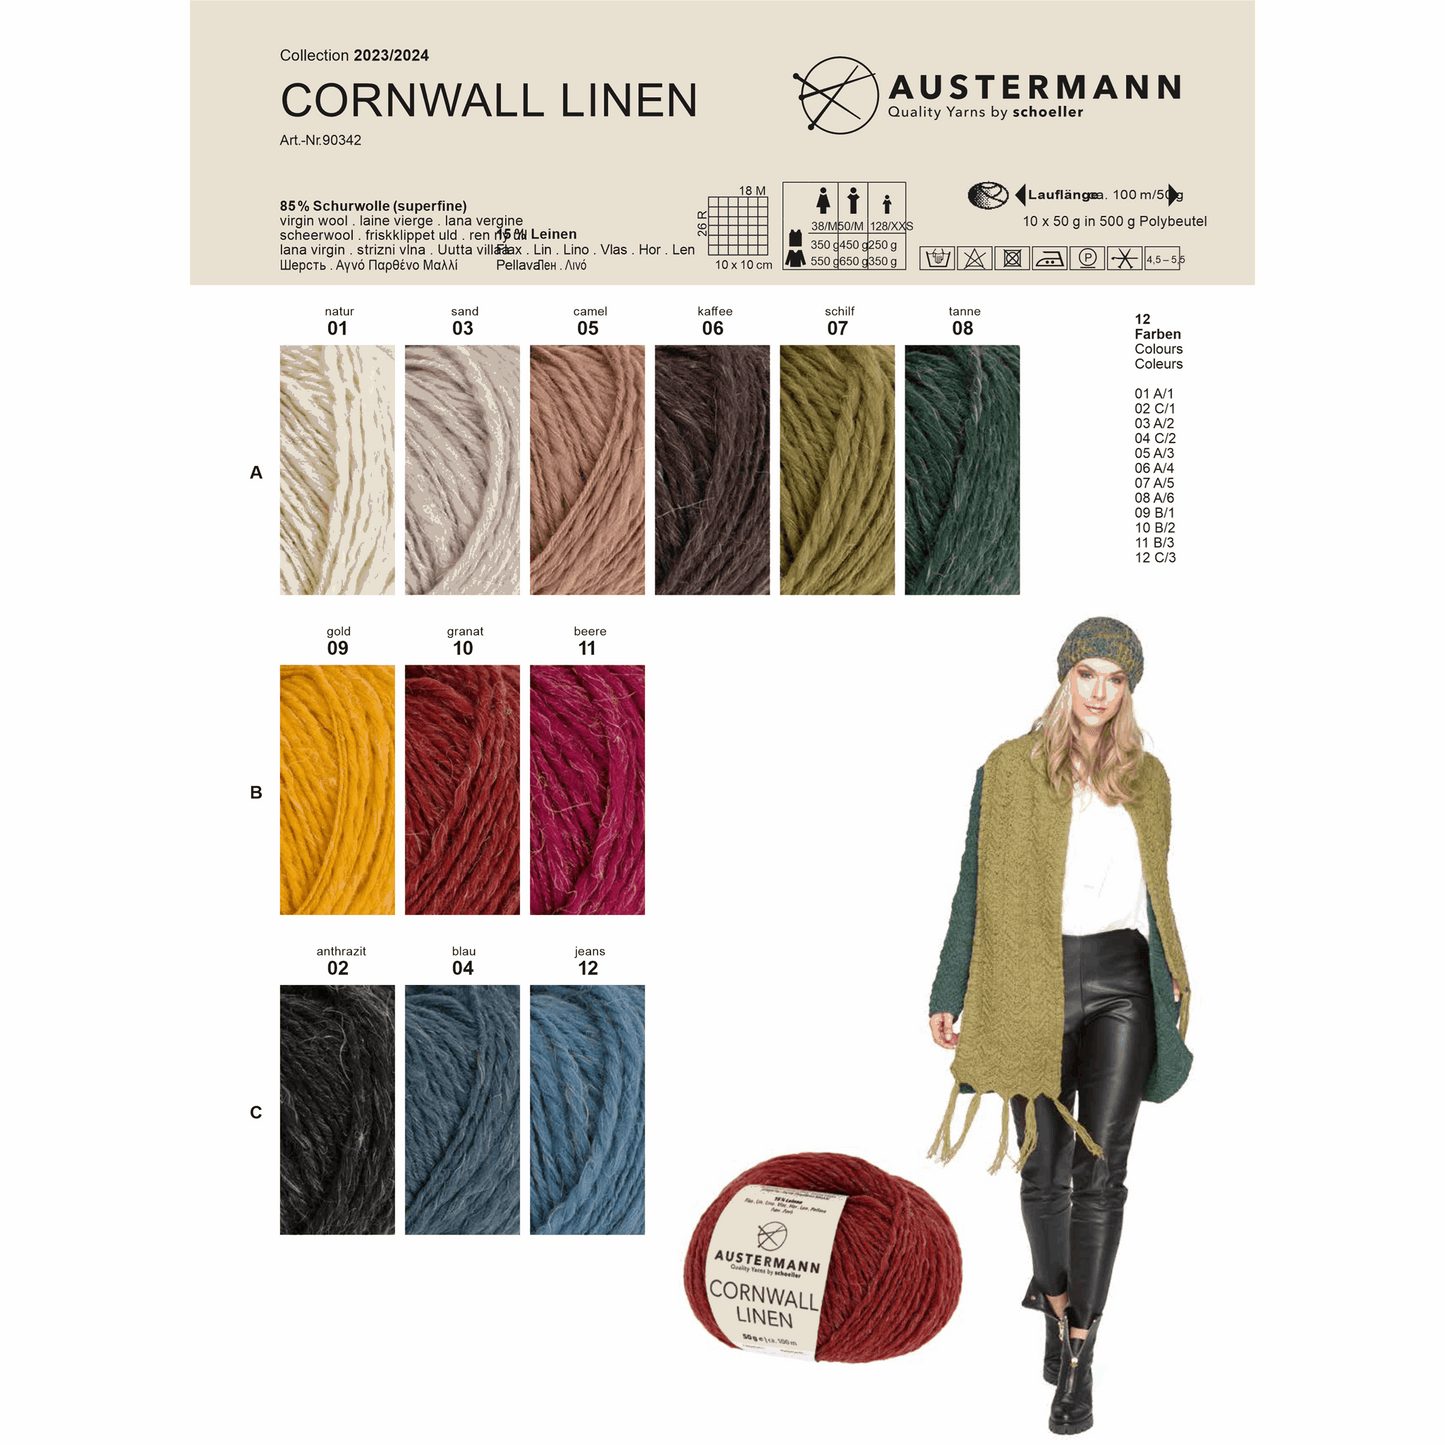 Cornwall Linen 50g, 90342, Farbe 9, gold